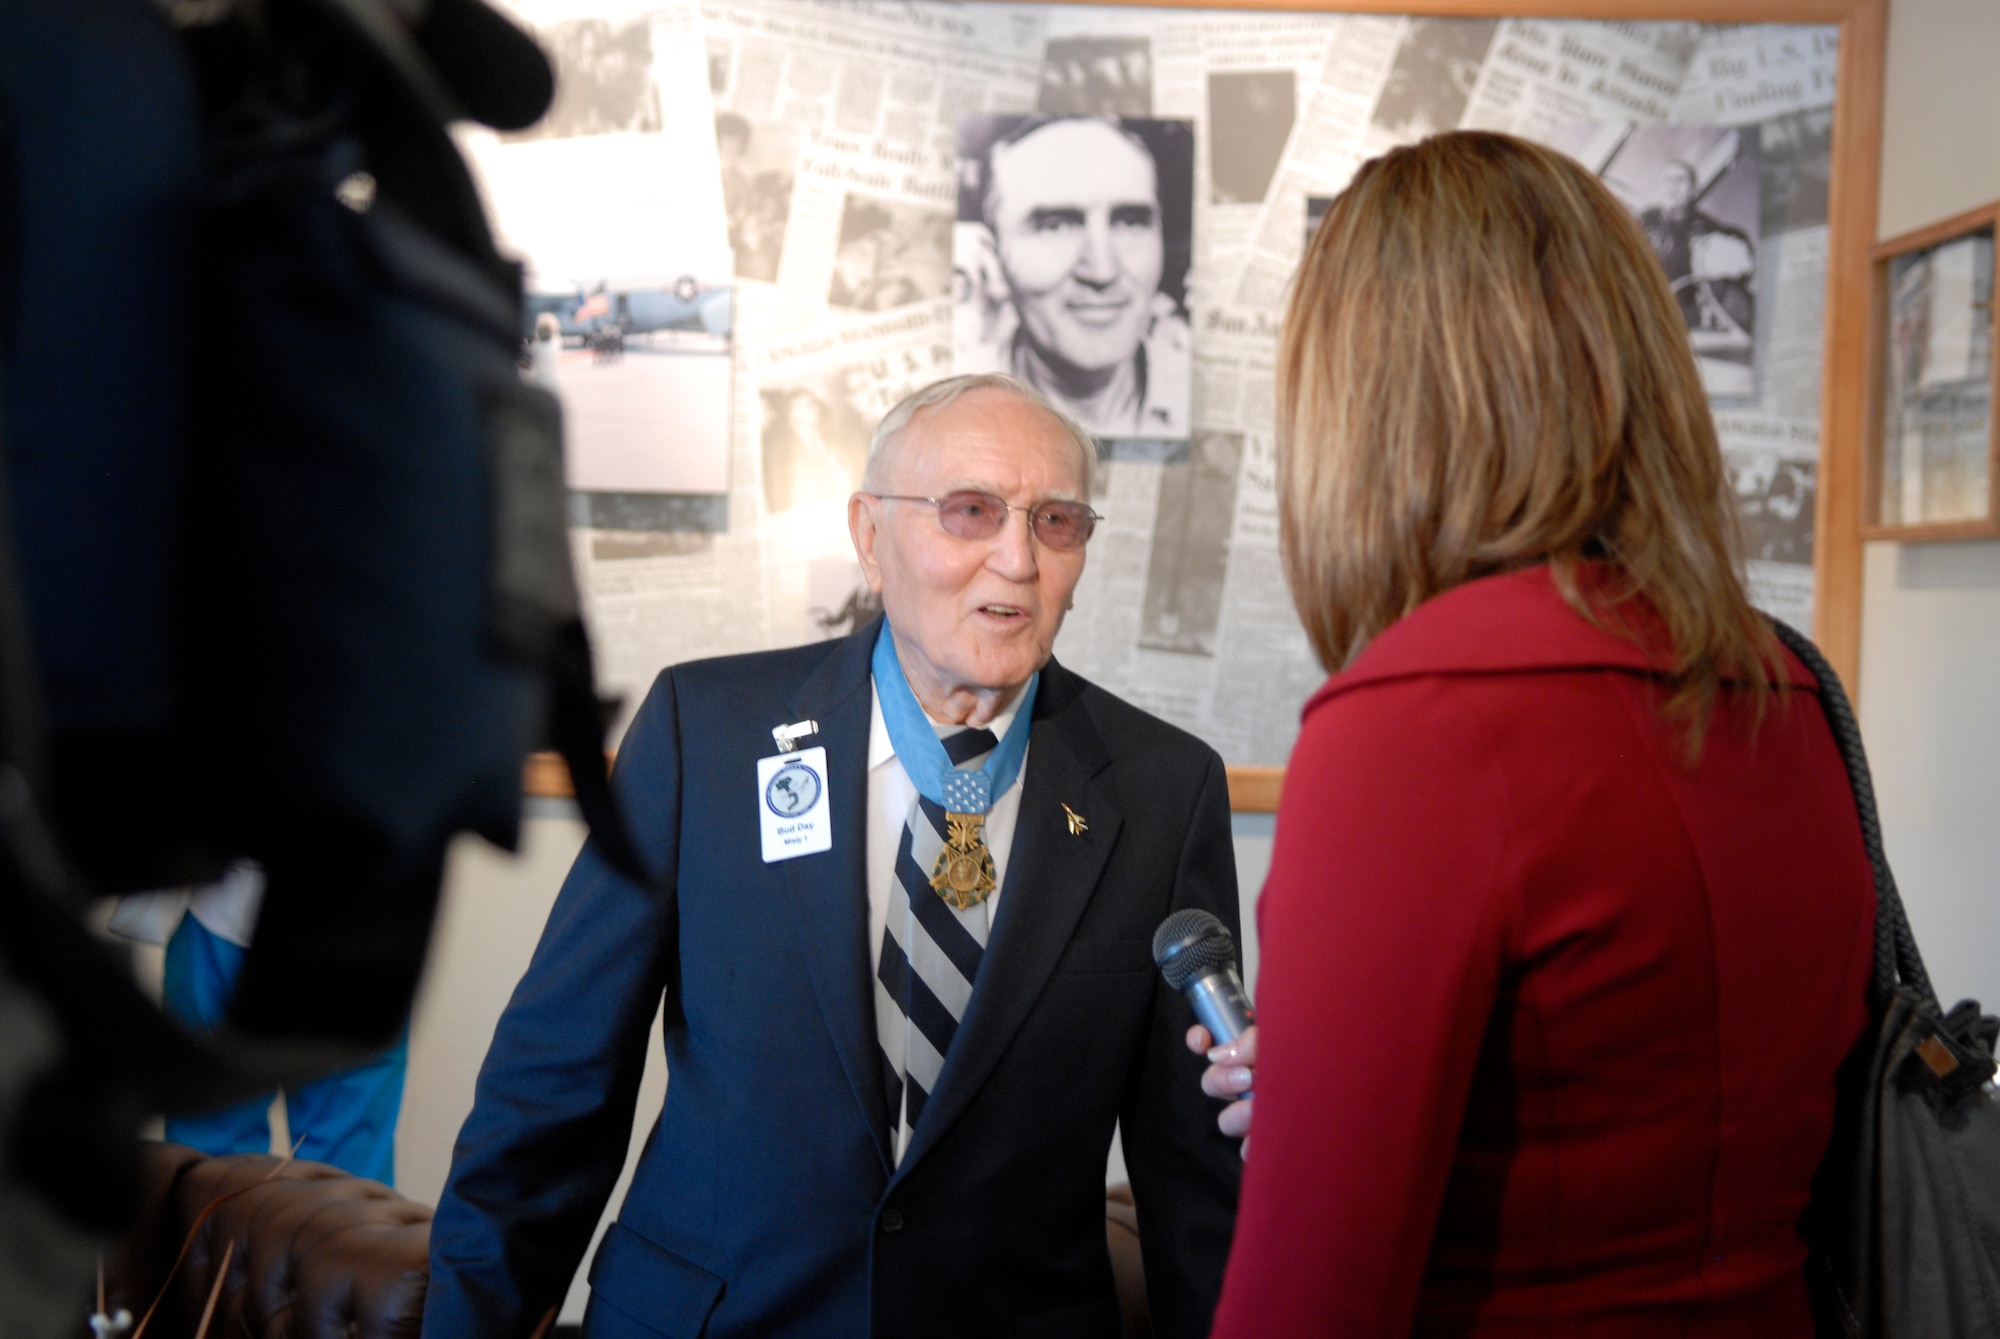 GOODFELLOW AIR FORCE BASE, Texas – Retired Col. George E. “Bud” Day is interviewed by local media, May 7, 2010. Two Visiting Officer Quarters were named in honor of Colonels Day and Leo K. Thorsness, both of whom received the Medal of Honor for actions while serving in Vietnam. (U.S. Air Force photo/Lou Czarnecki)